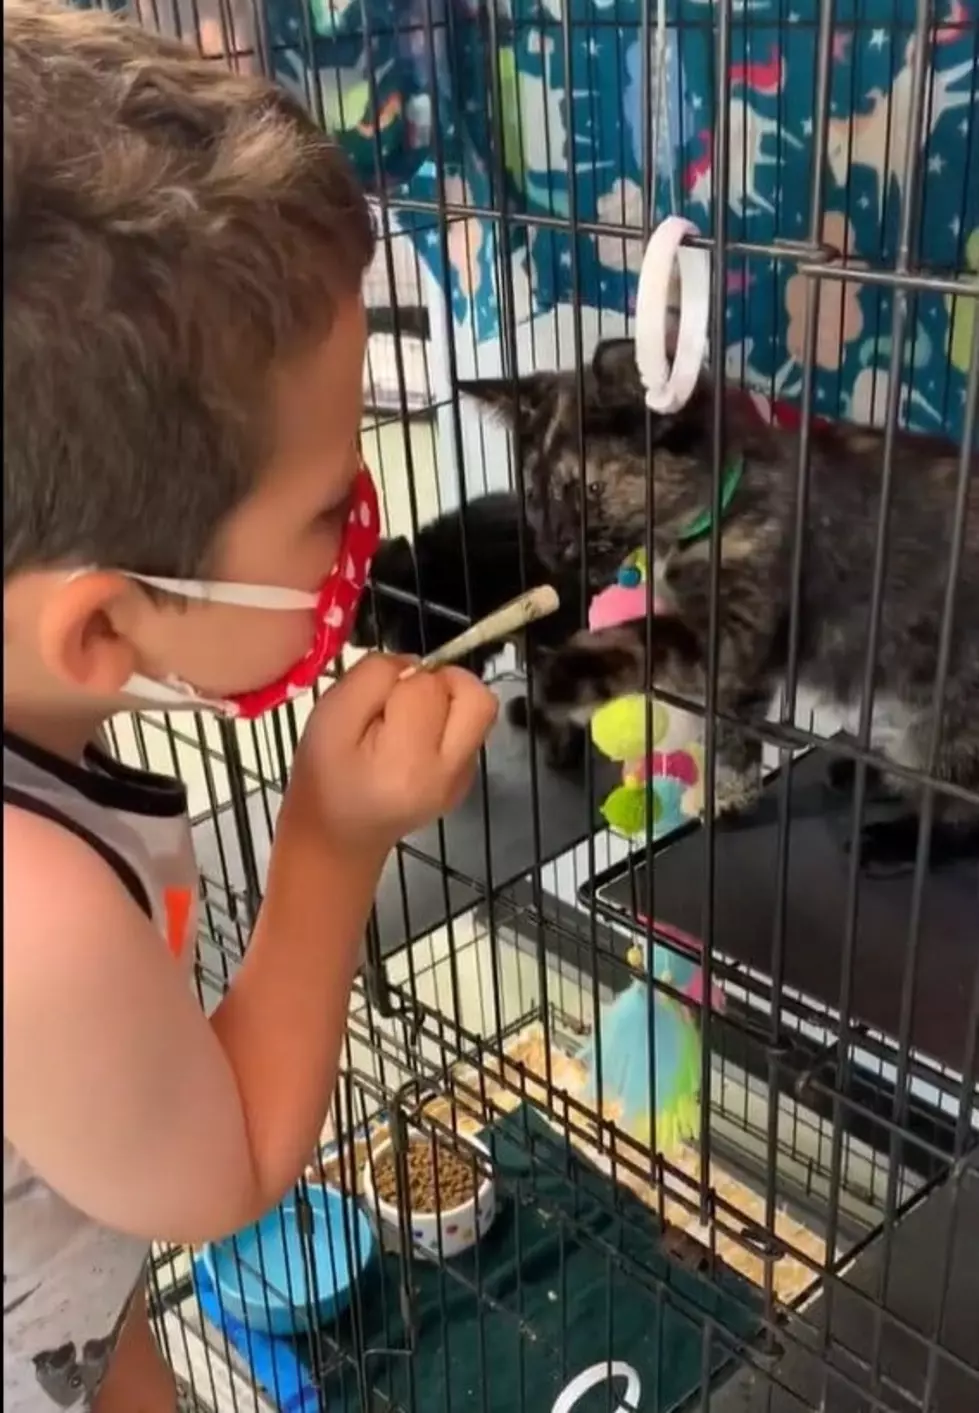 [WATCH] New York Boy Has Cutest Interaction with Shelter Cats